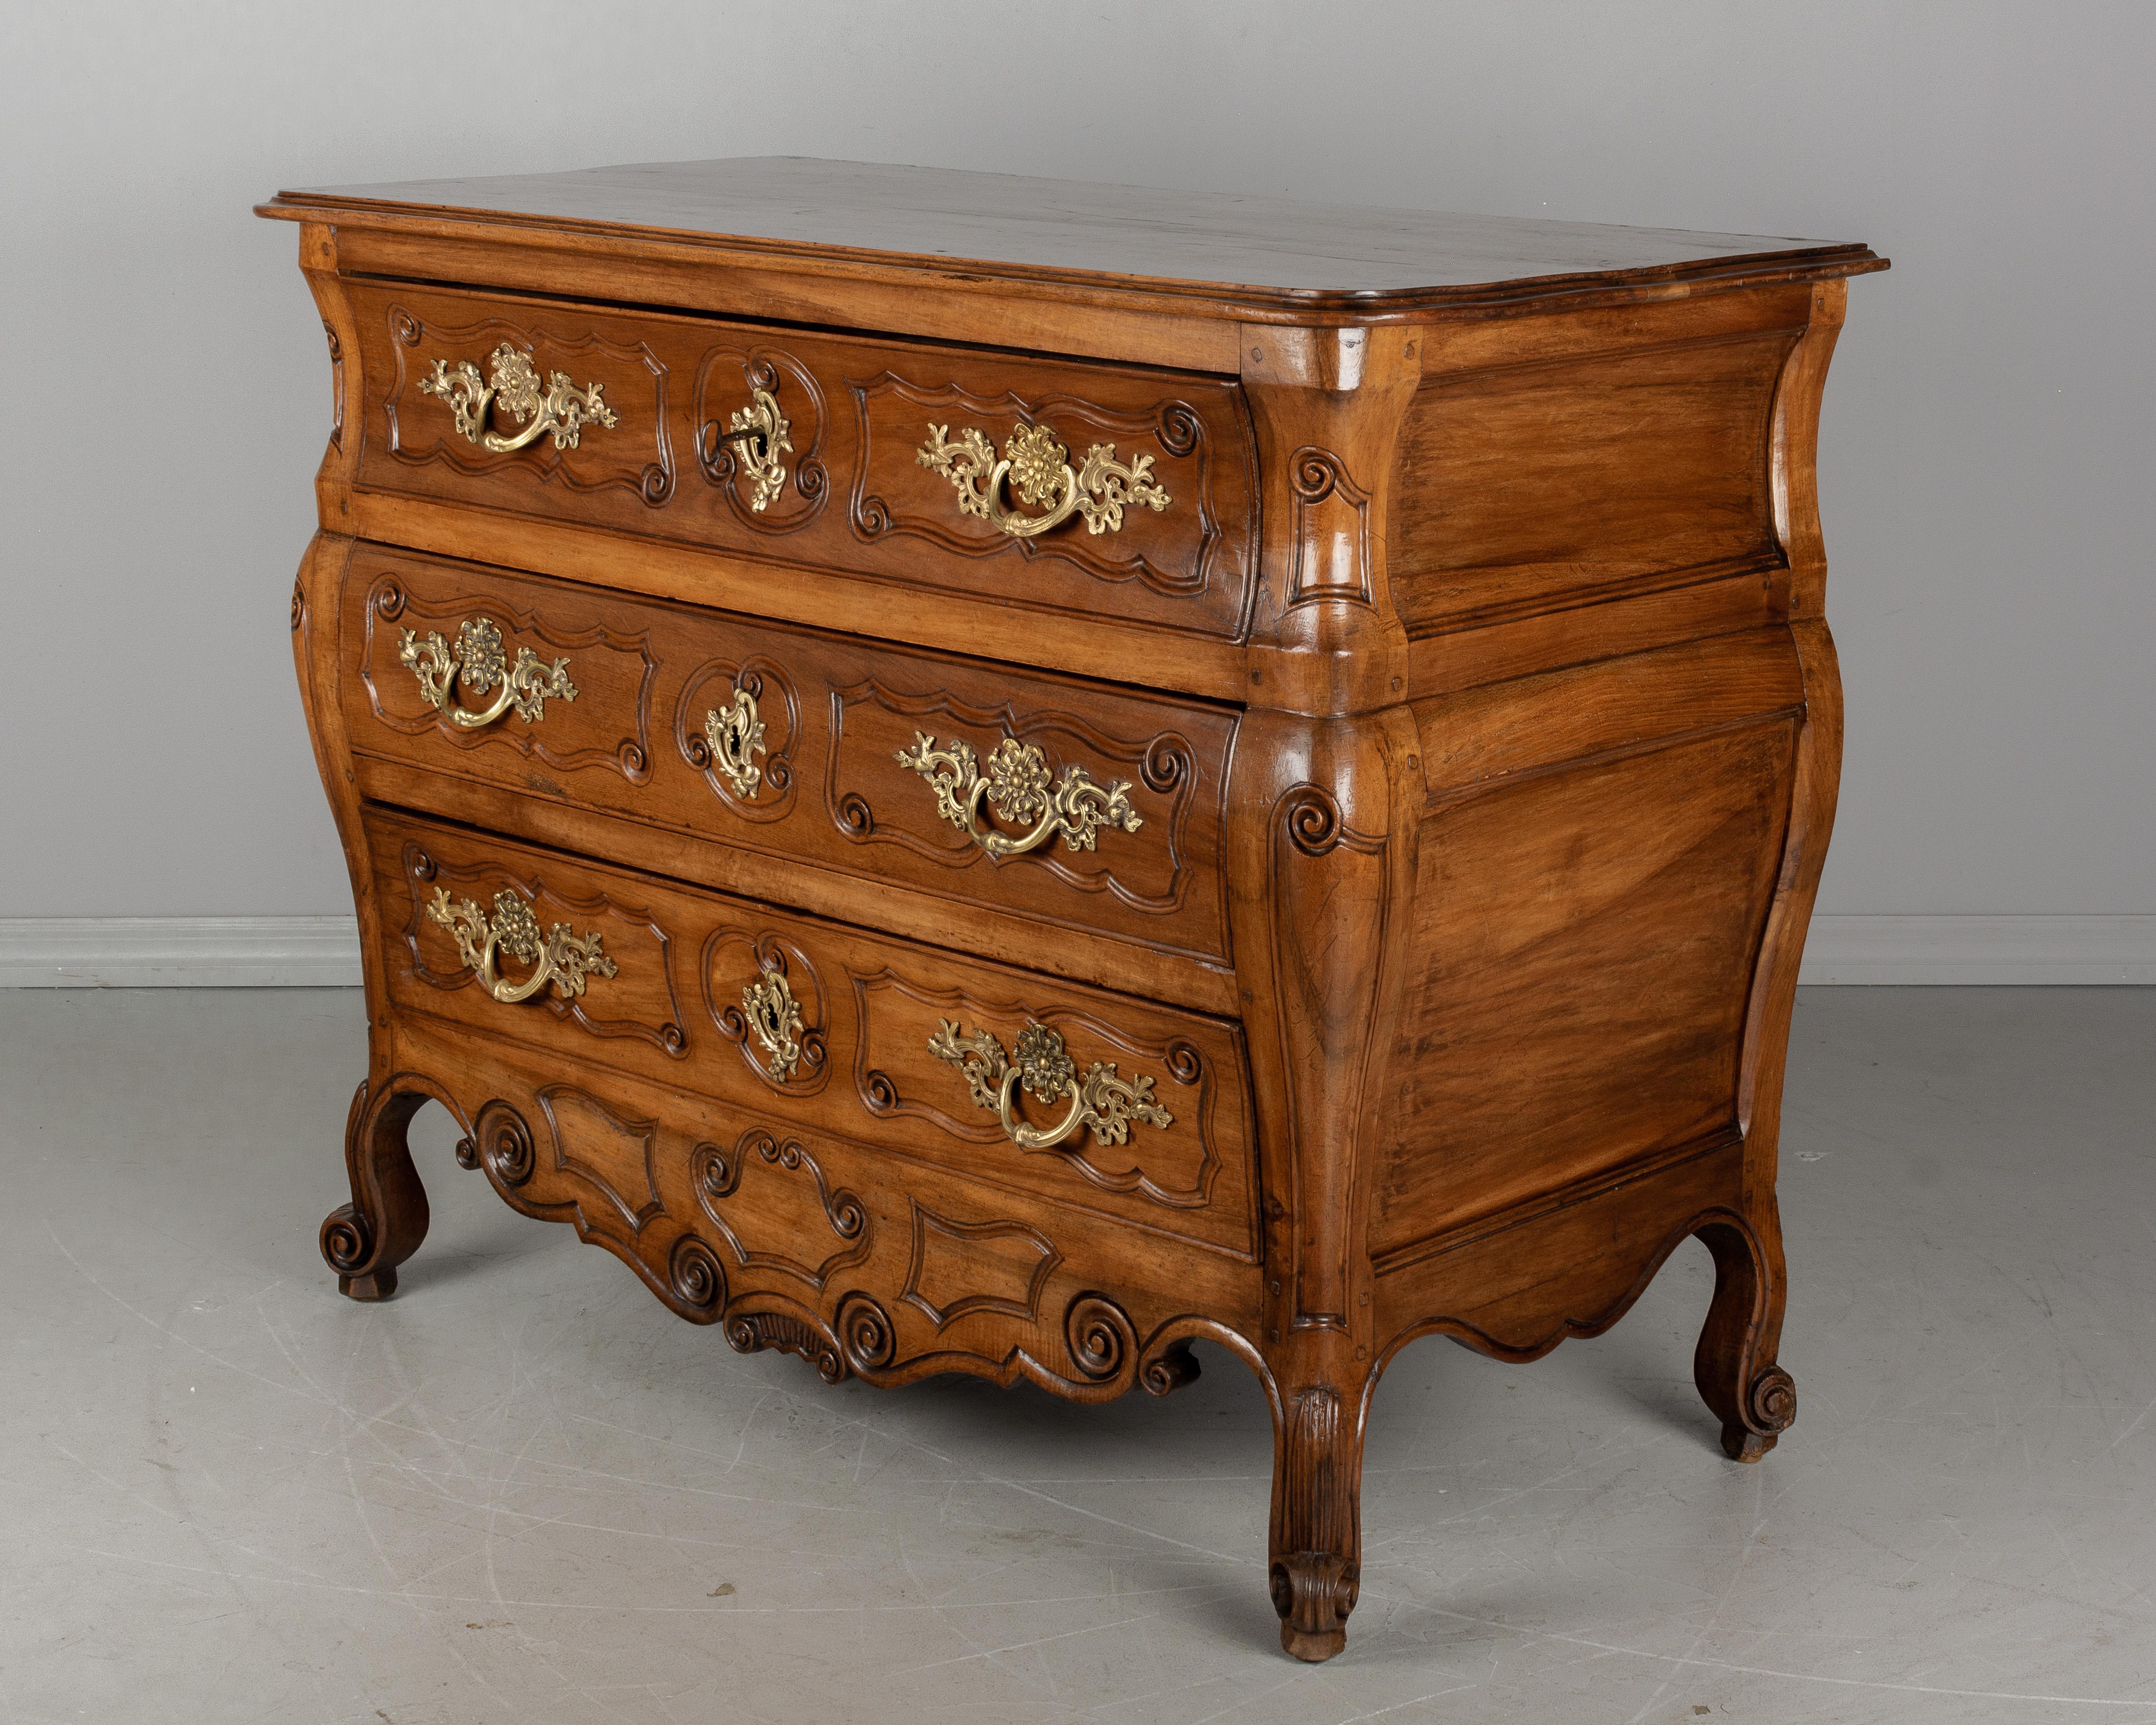 A 19th century French Louis XV style commode, or chest of drawers, from the Bordeaux region made of solid walnut. Large in scale with nice proportions and bombé form. Three dovetailed drawers with carved details and original bronze hardware. Locks